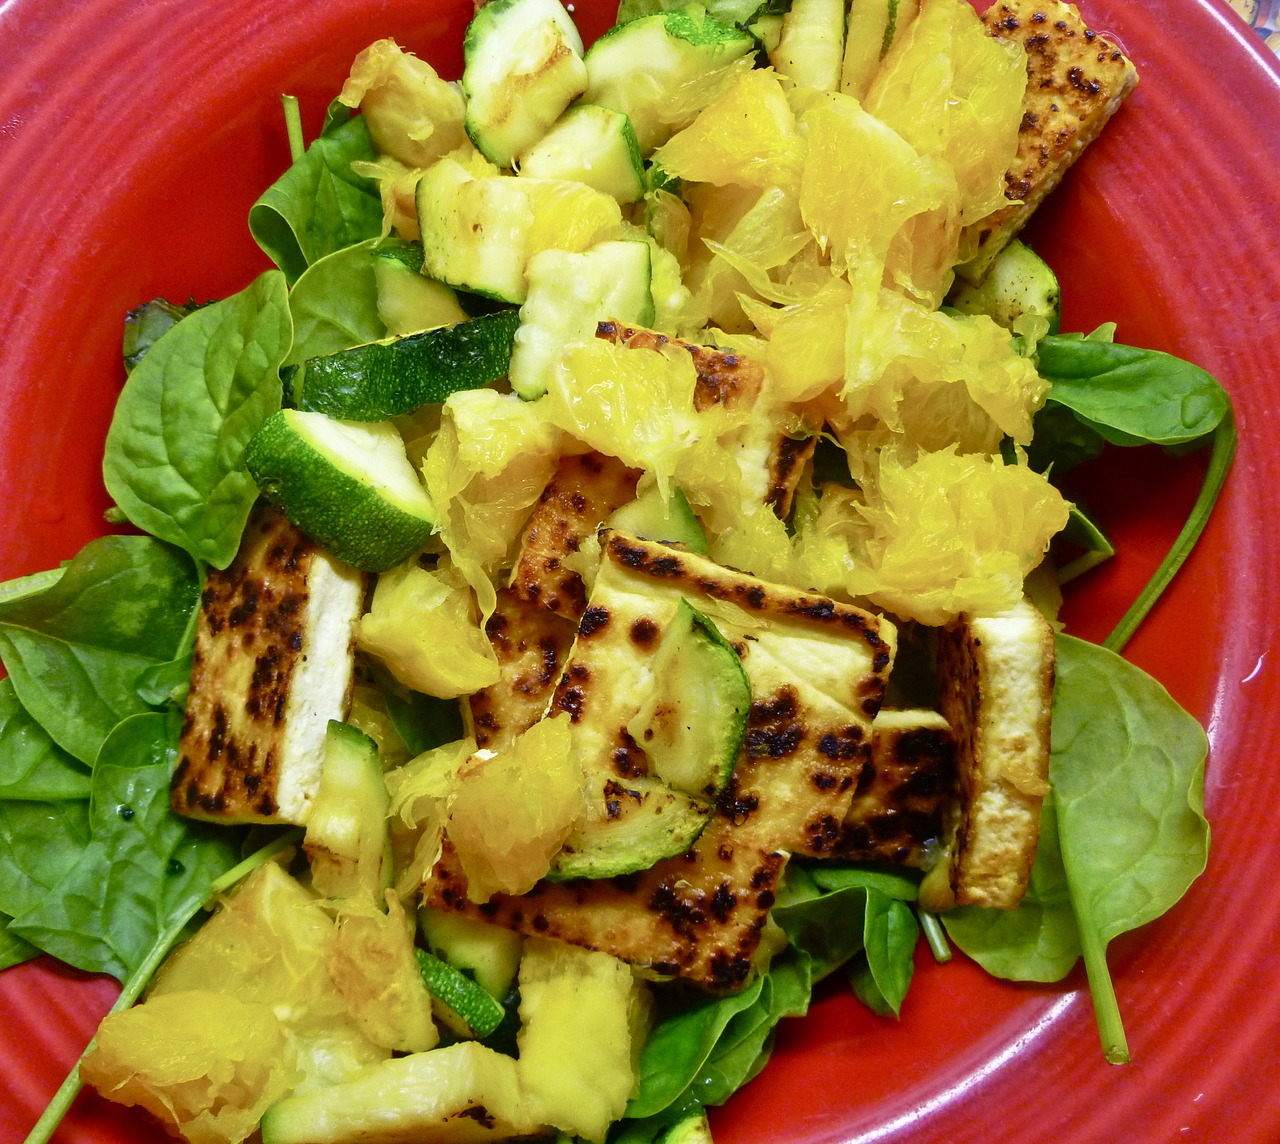 lovely lunches: pan fried tofu and zucchini with orange bits and spinach
*this was my first time making tofu! thanks to Oh She Glows for the simple how-to!